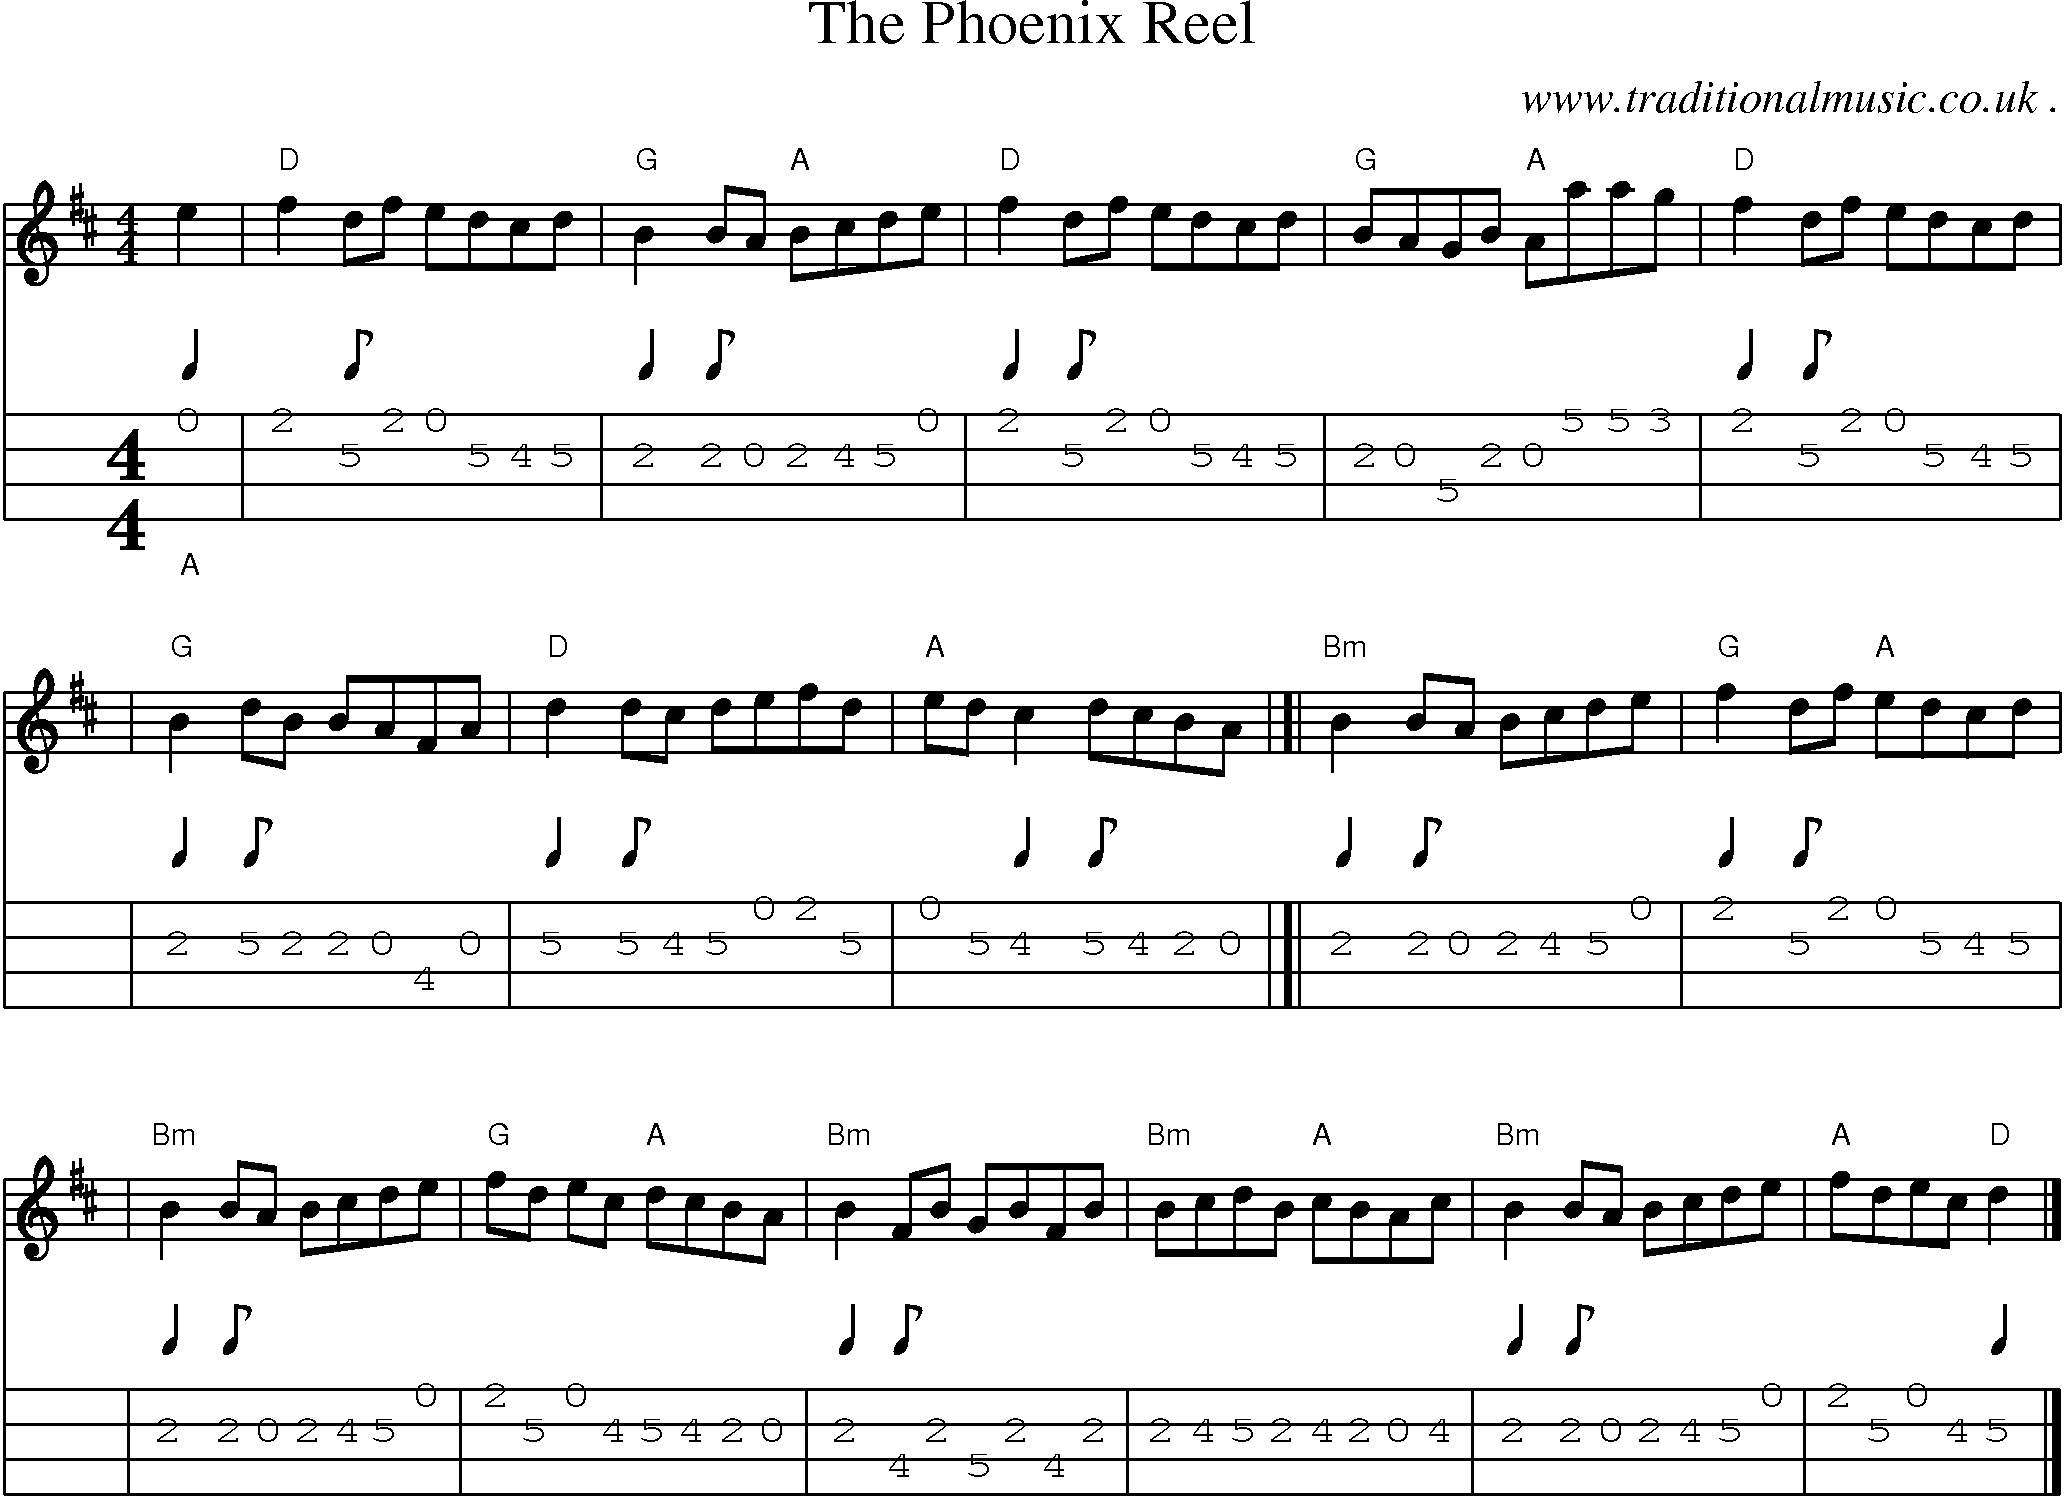 Sheet-music  score, Chords and Mandolin Tabs for The Phoenix Reel